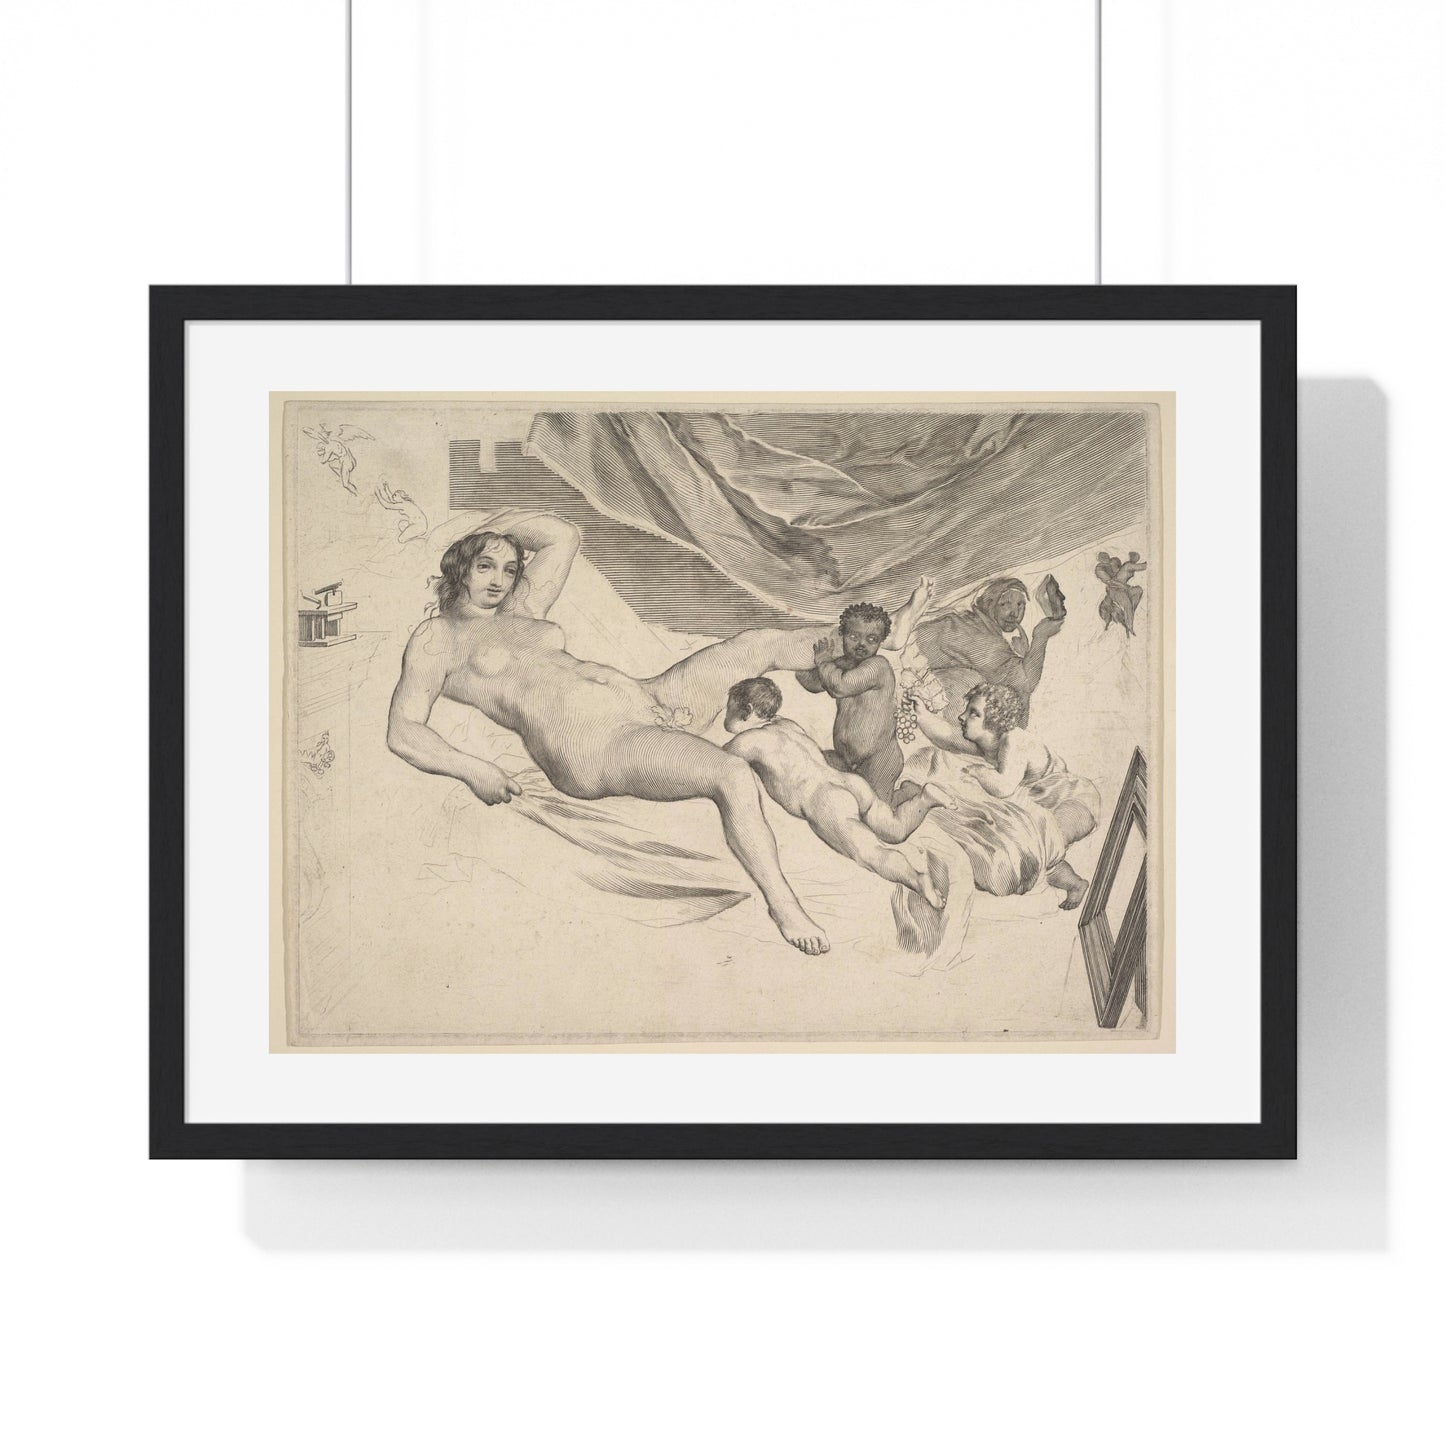 Allegorical Subject: Nude Woman, Three Children and a Mousetrap 'La Sourcière' by Claude Mellan, from the Original, Framed Art Print